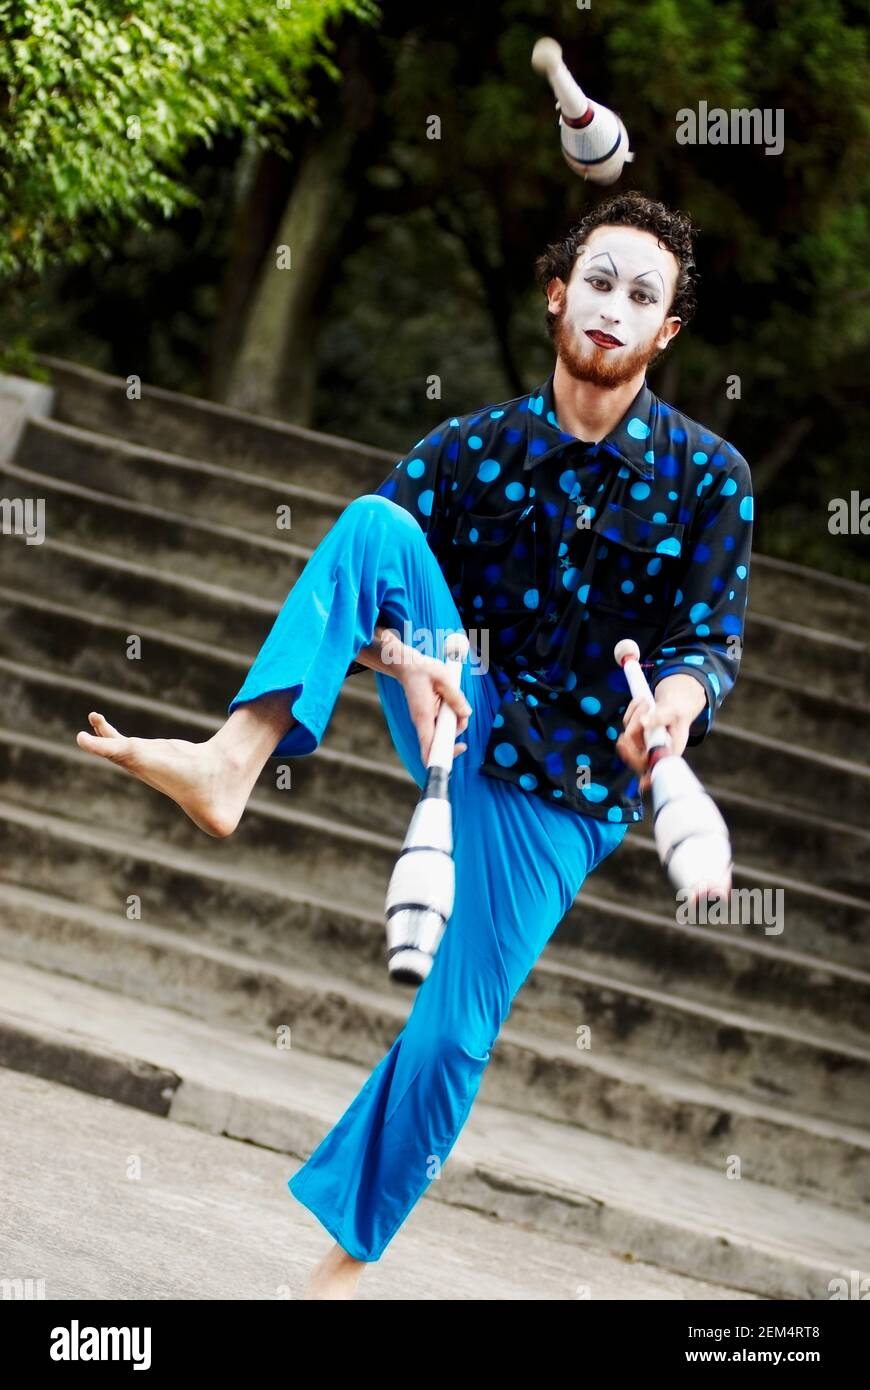 Portrait of a mid adult man with a painted face juggling pins Stock Photo